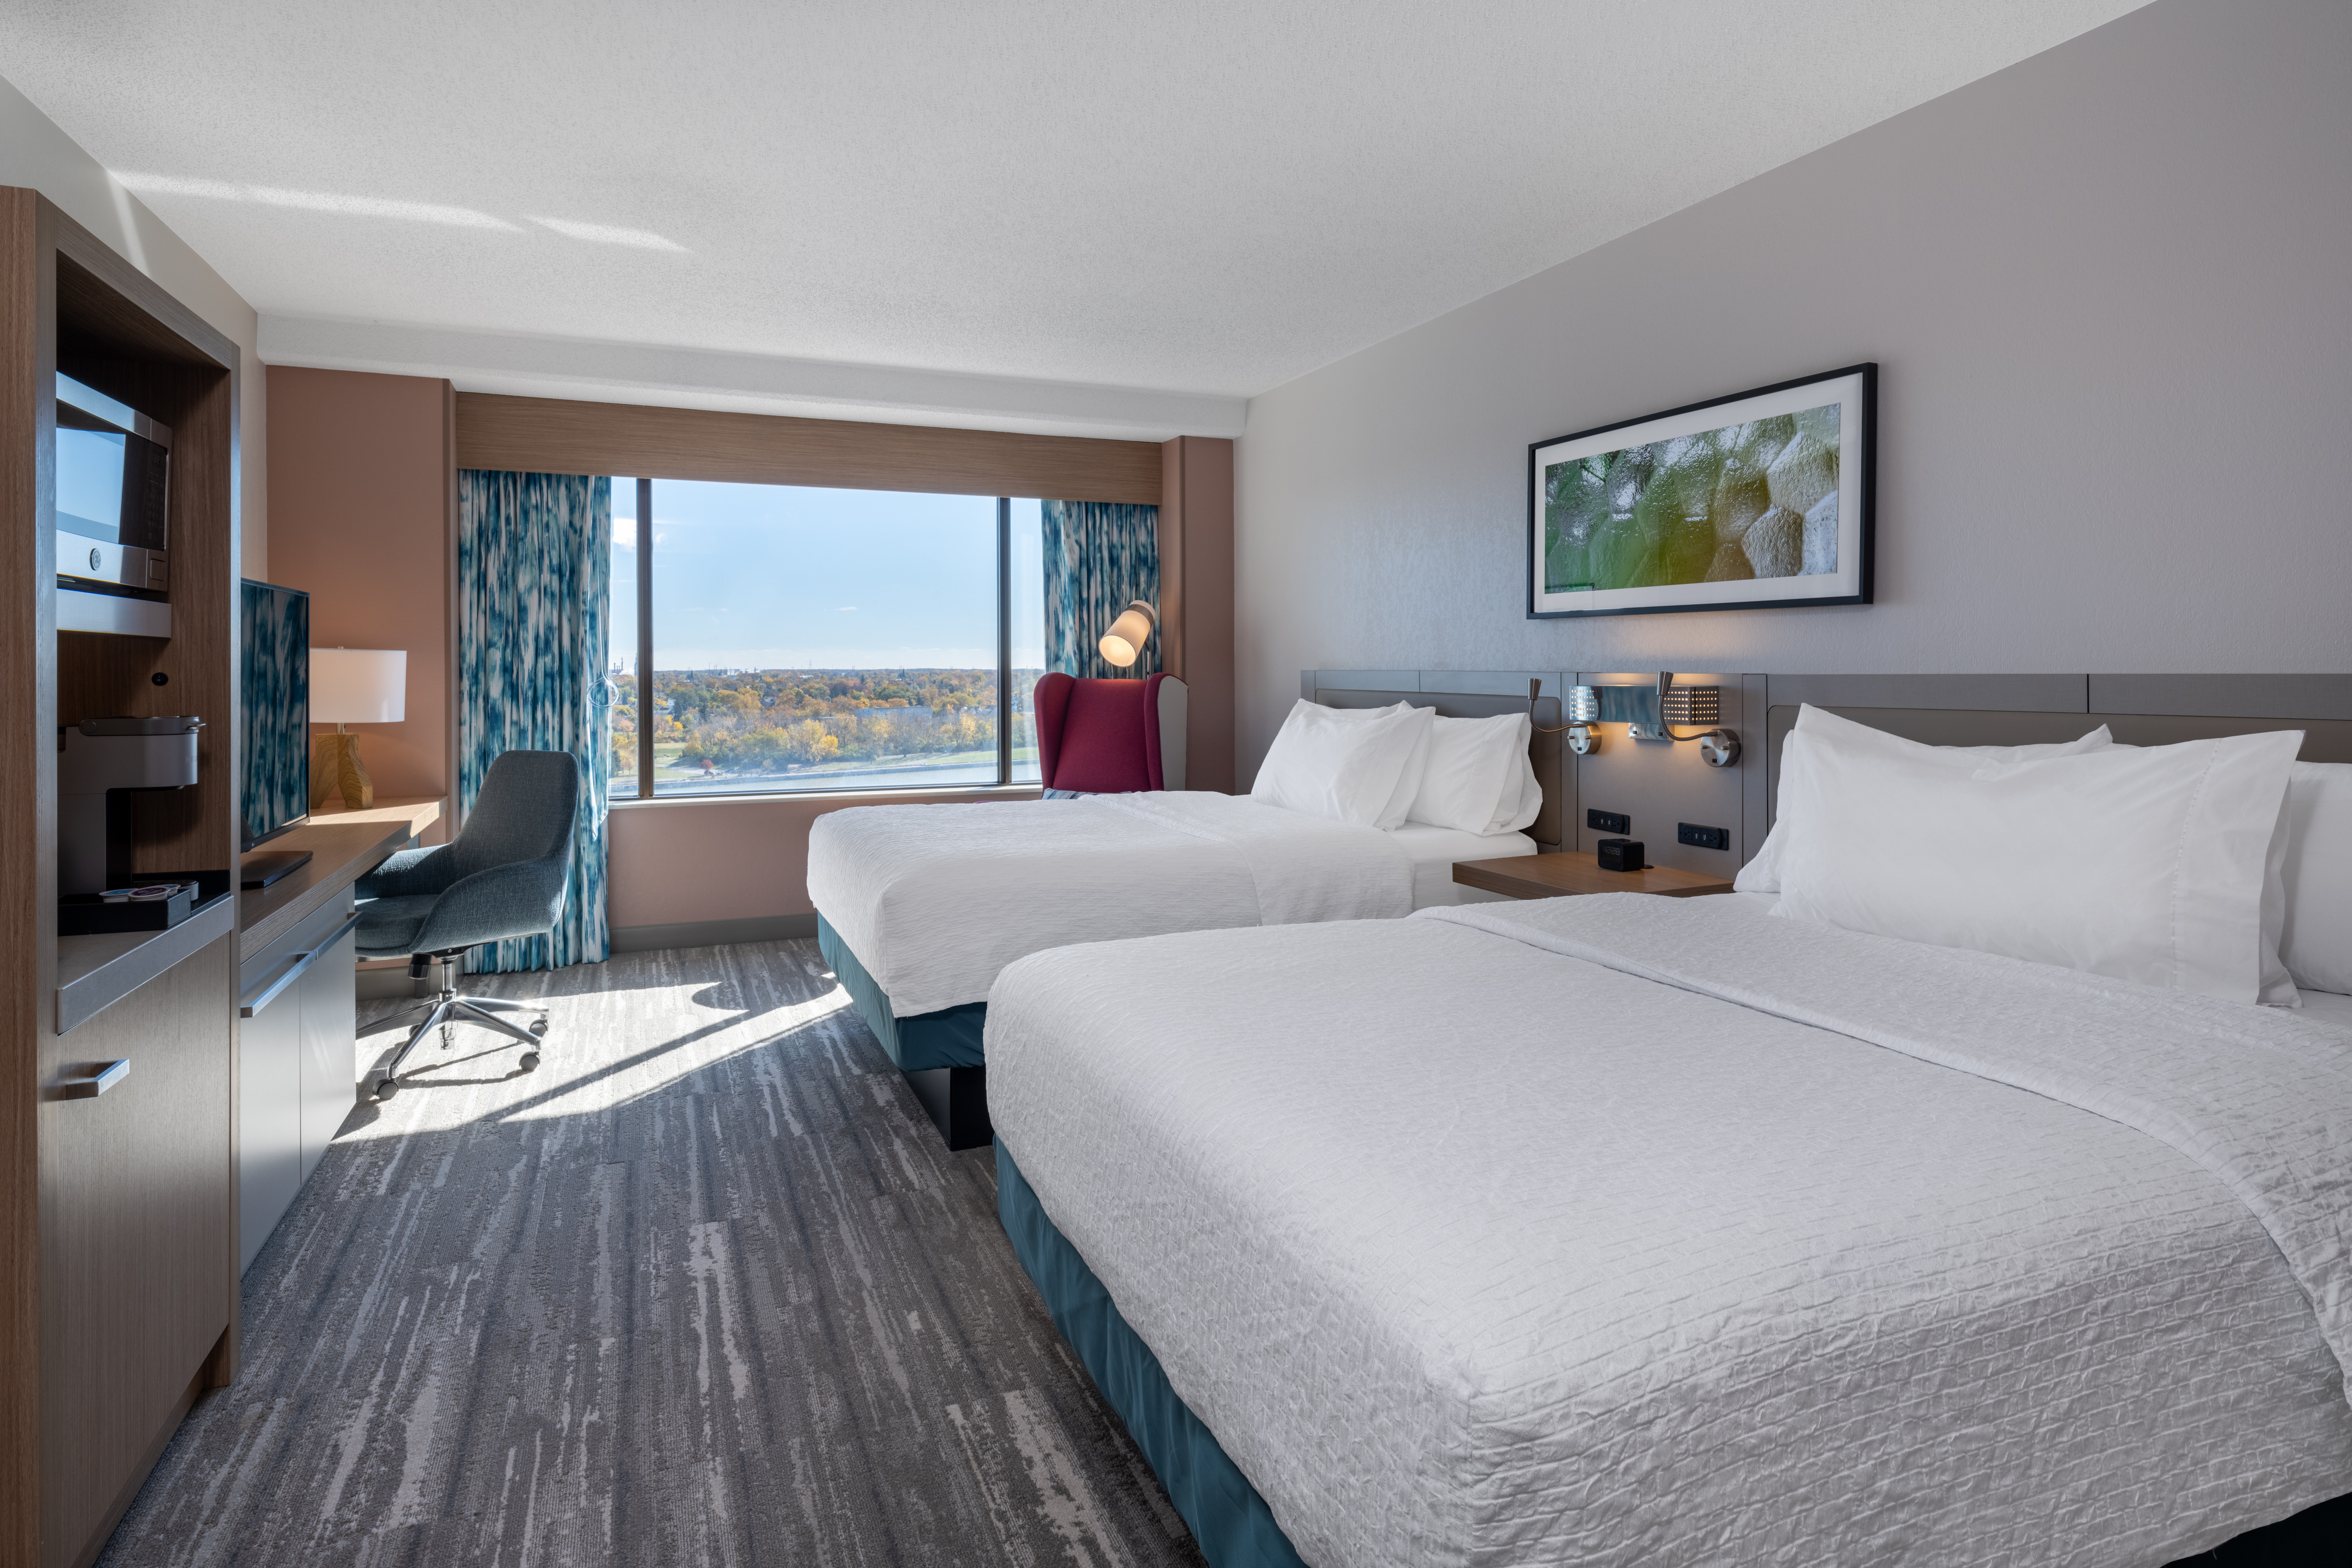 Our rooms are perfect for work, and play